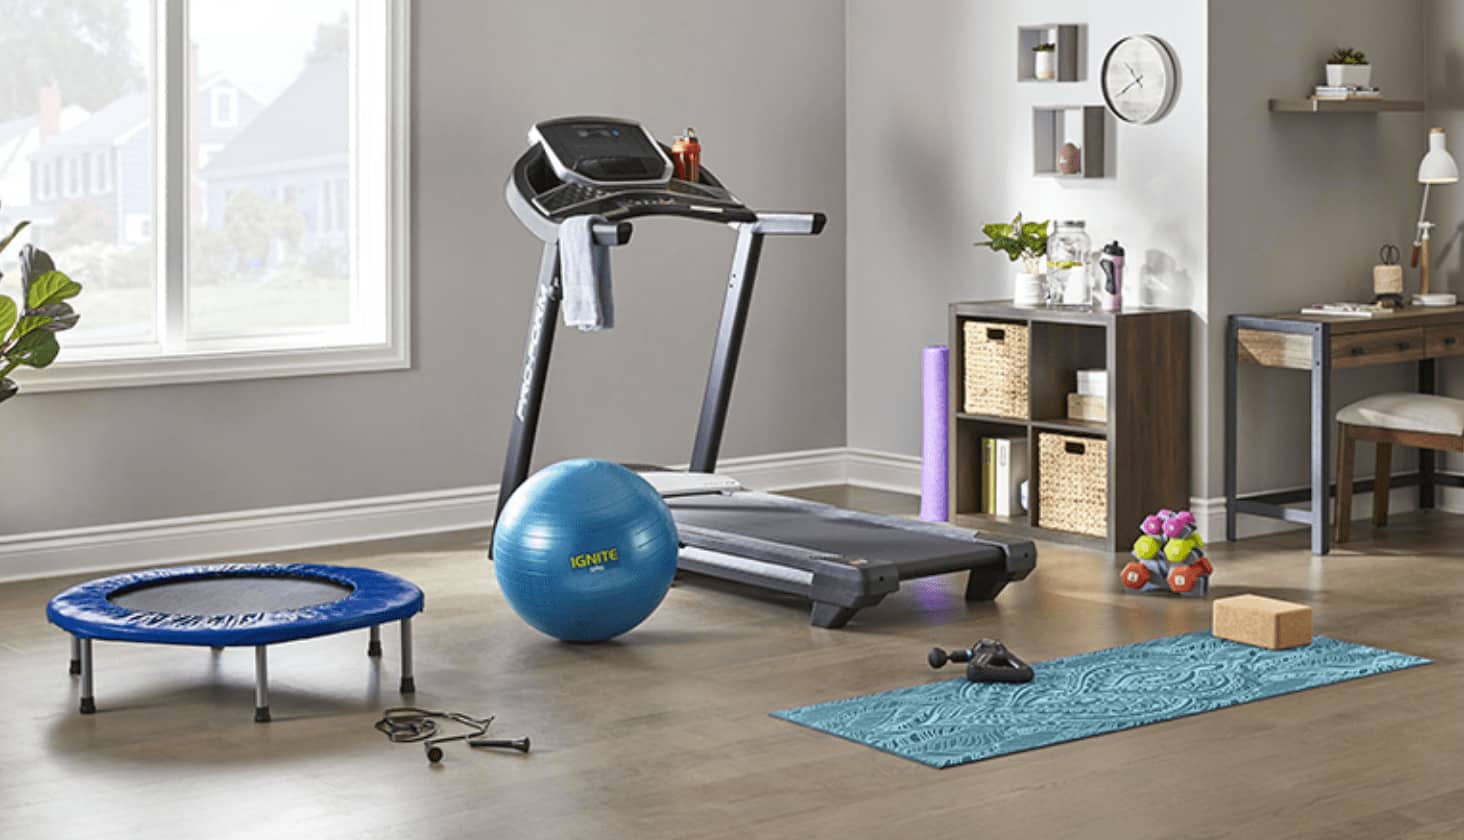 Yoga mat, treadmill, exercise ball and weights near a window.